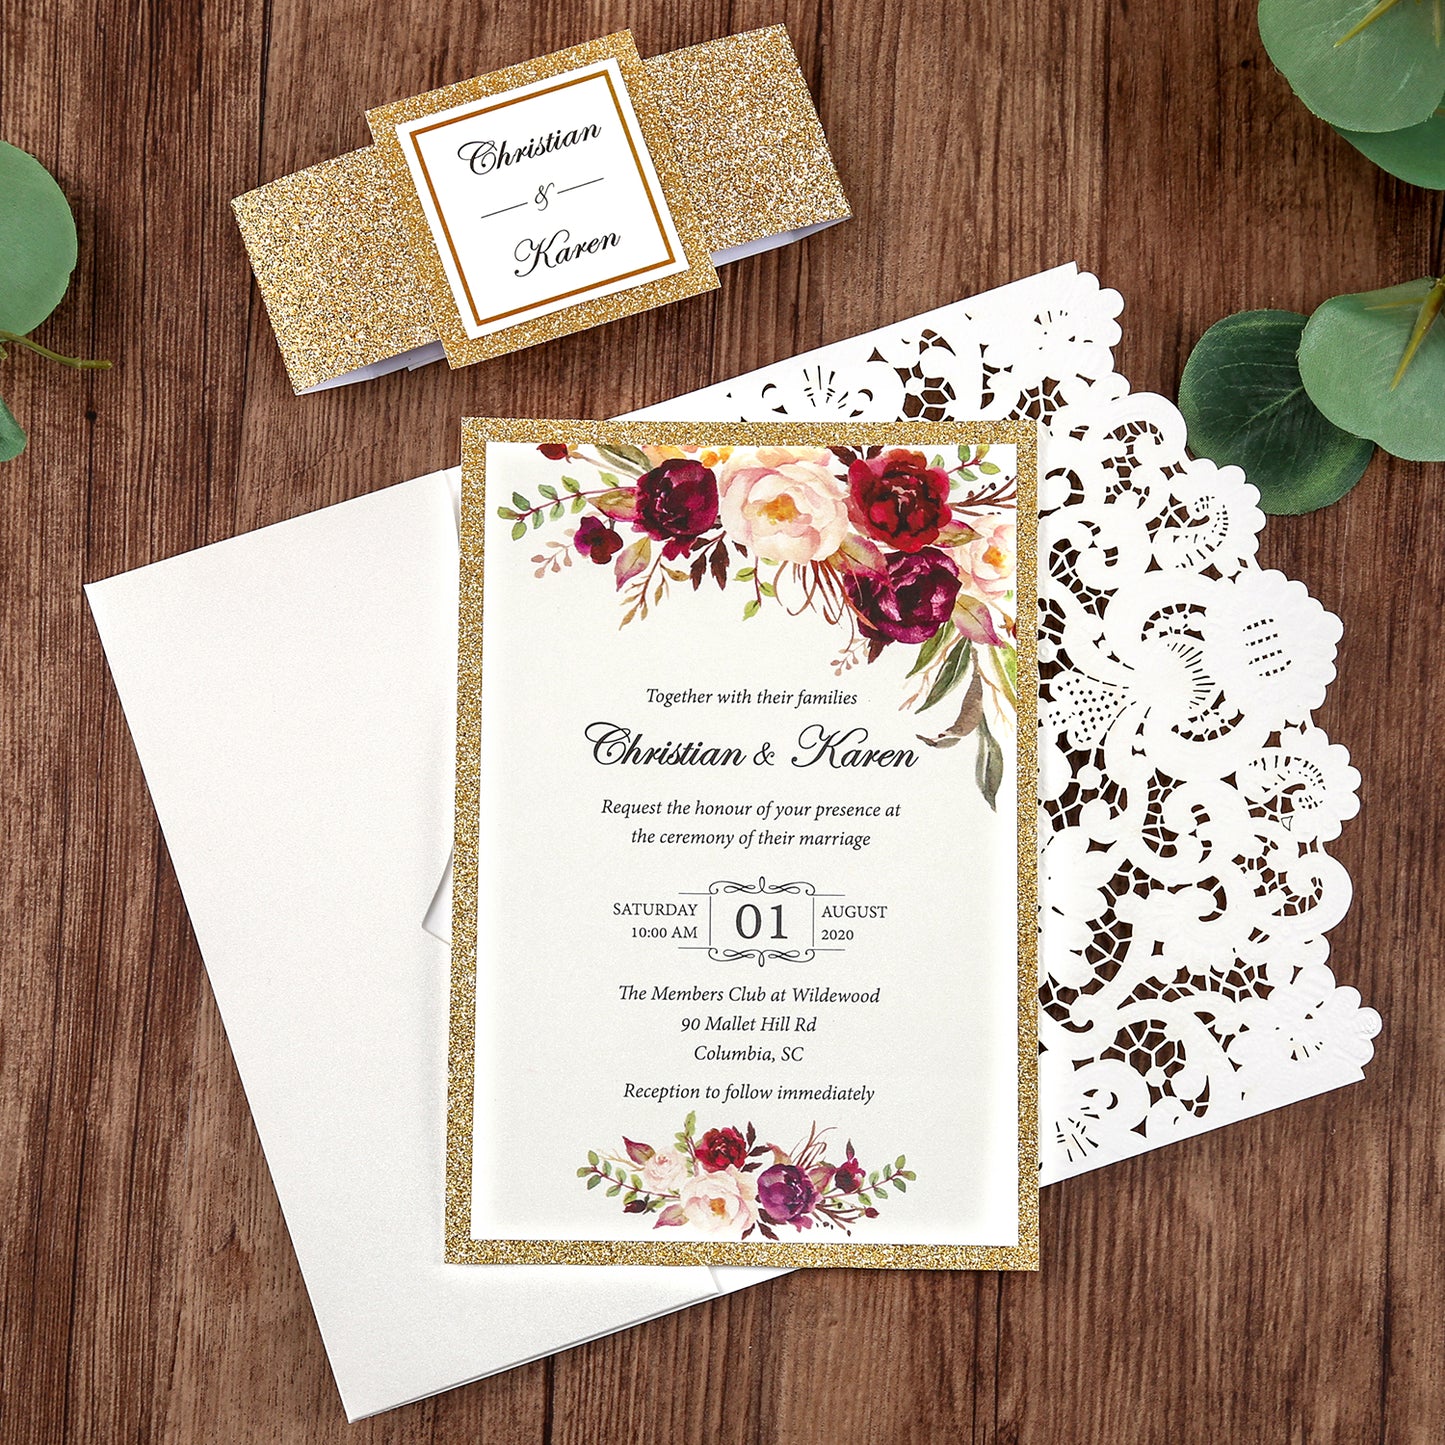 White Hollow Flora Laser Cut Invitations with Gold Glitter Border and Glitter Belly Band for wedding,bridal shower